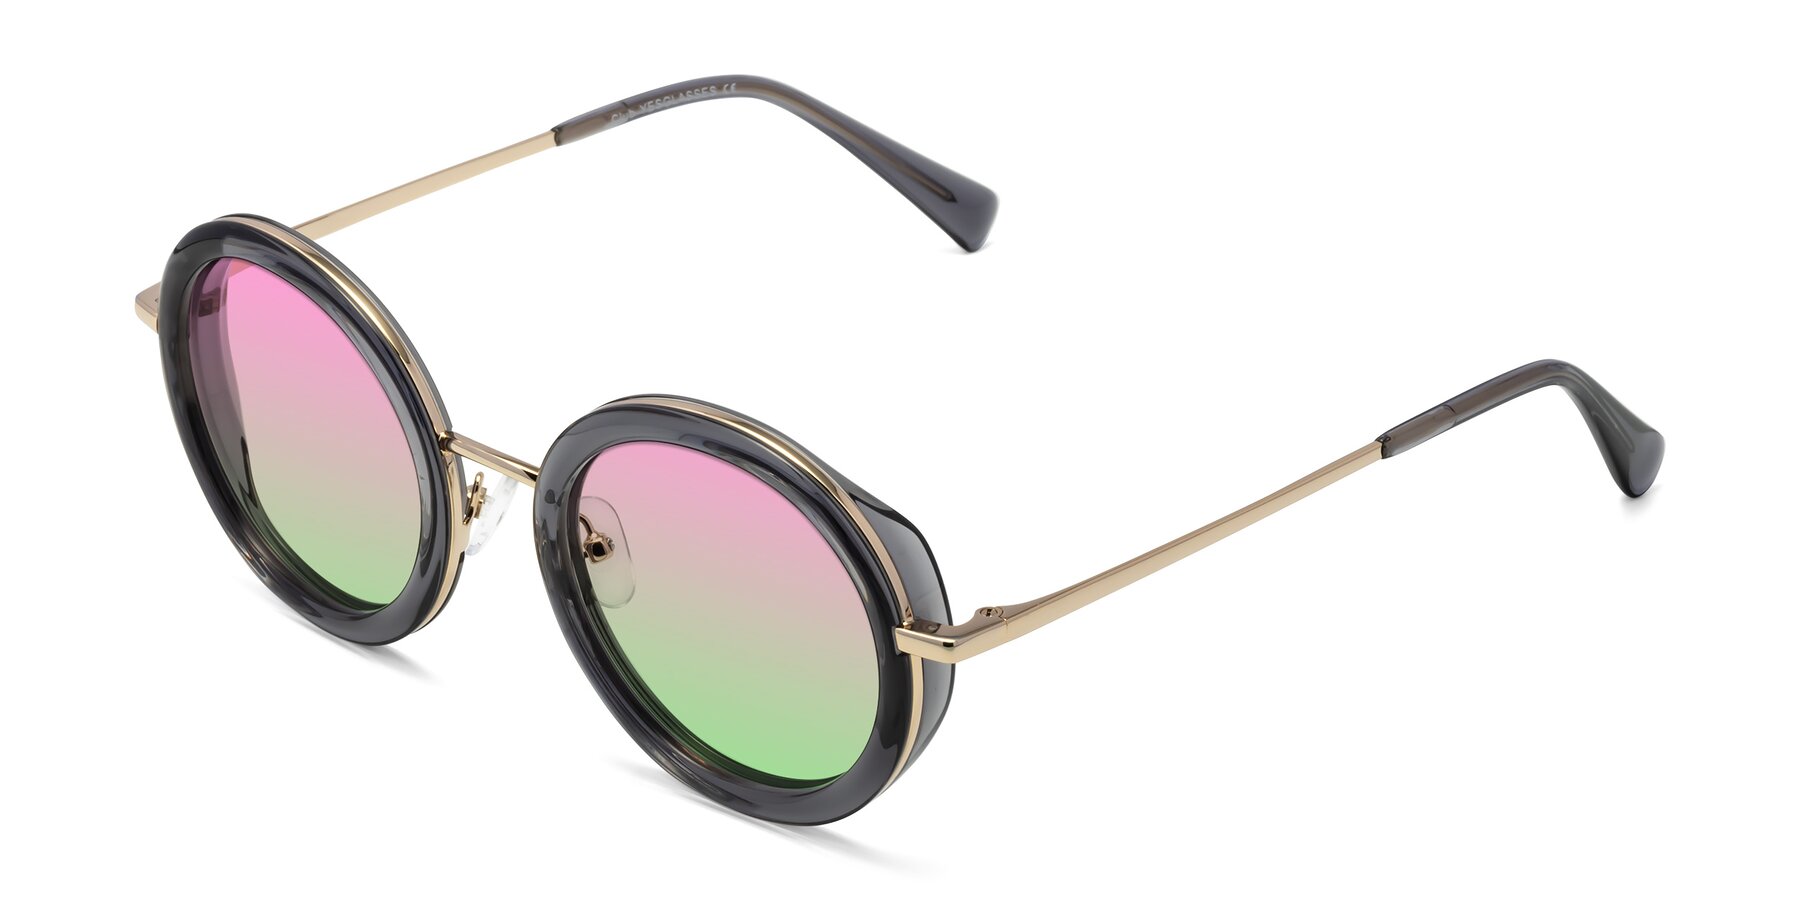 Angle of Club in Gray-Gold with Pink / Green Gradient Lenses